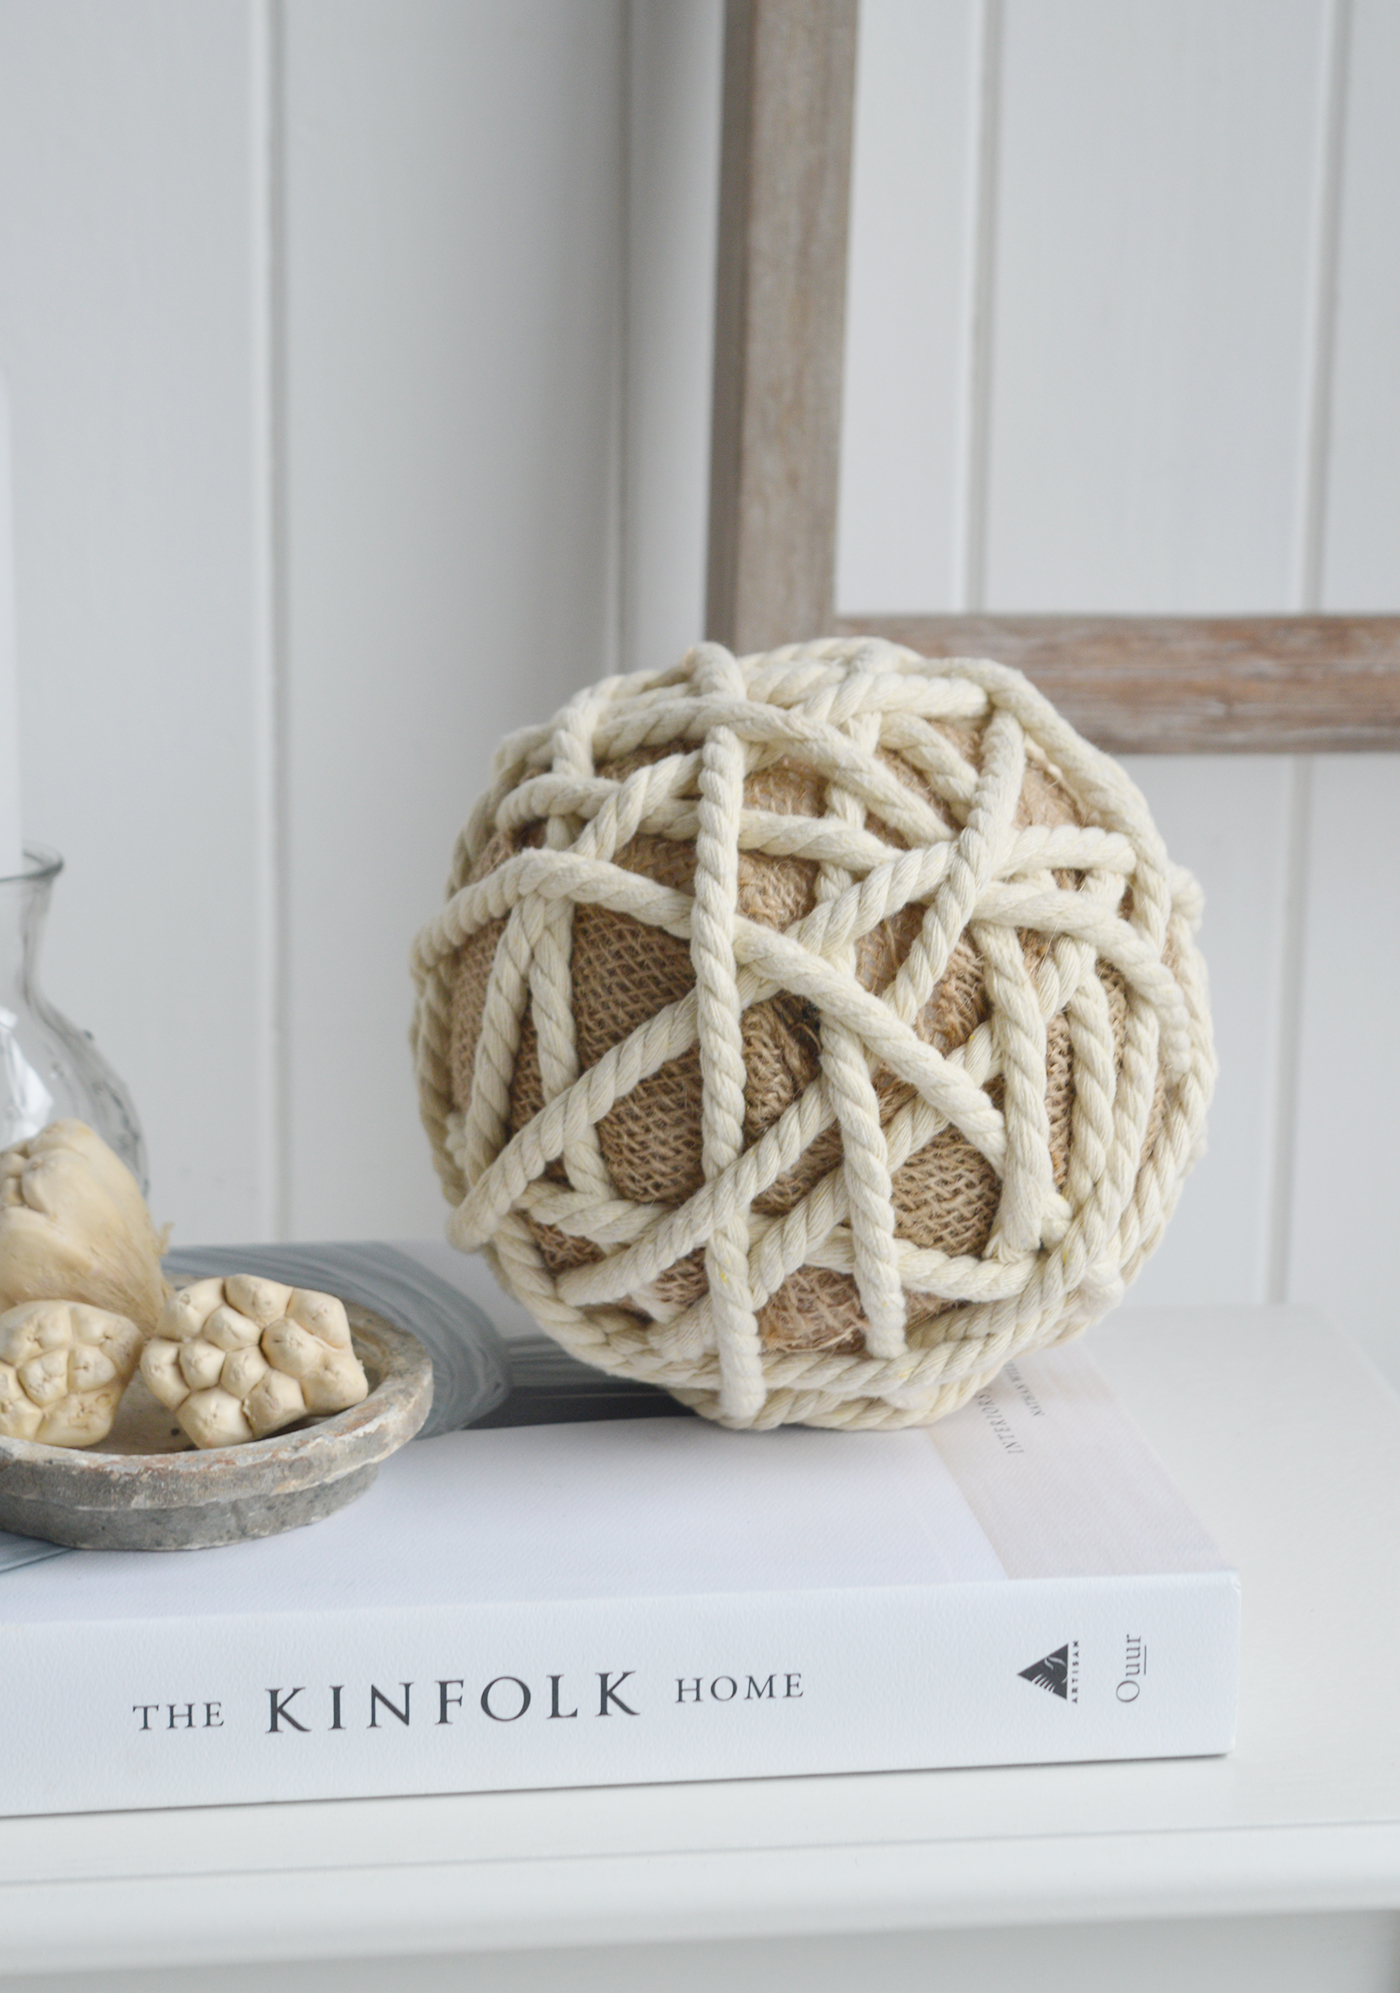 White Furniture and accessories for the home. Rope Ball  - Coffee Table, Shelf and Console styling for New England, Country Farmhouse and coastal home interior decor